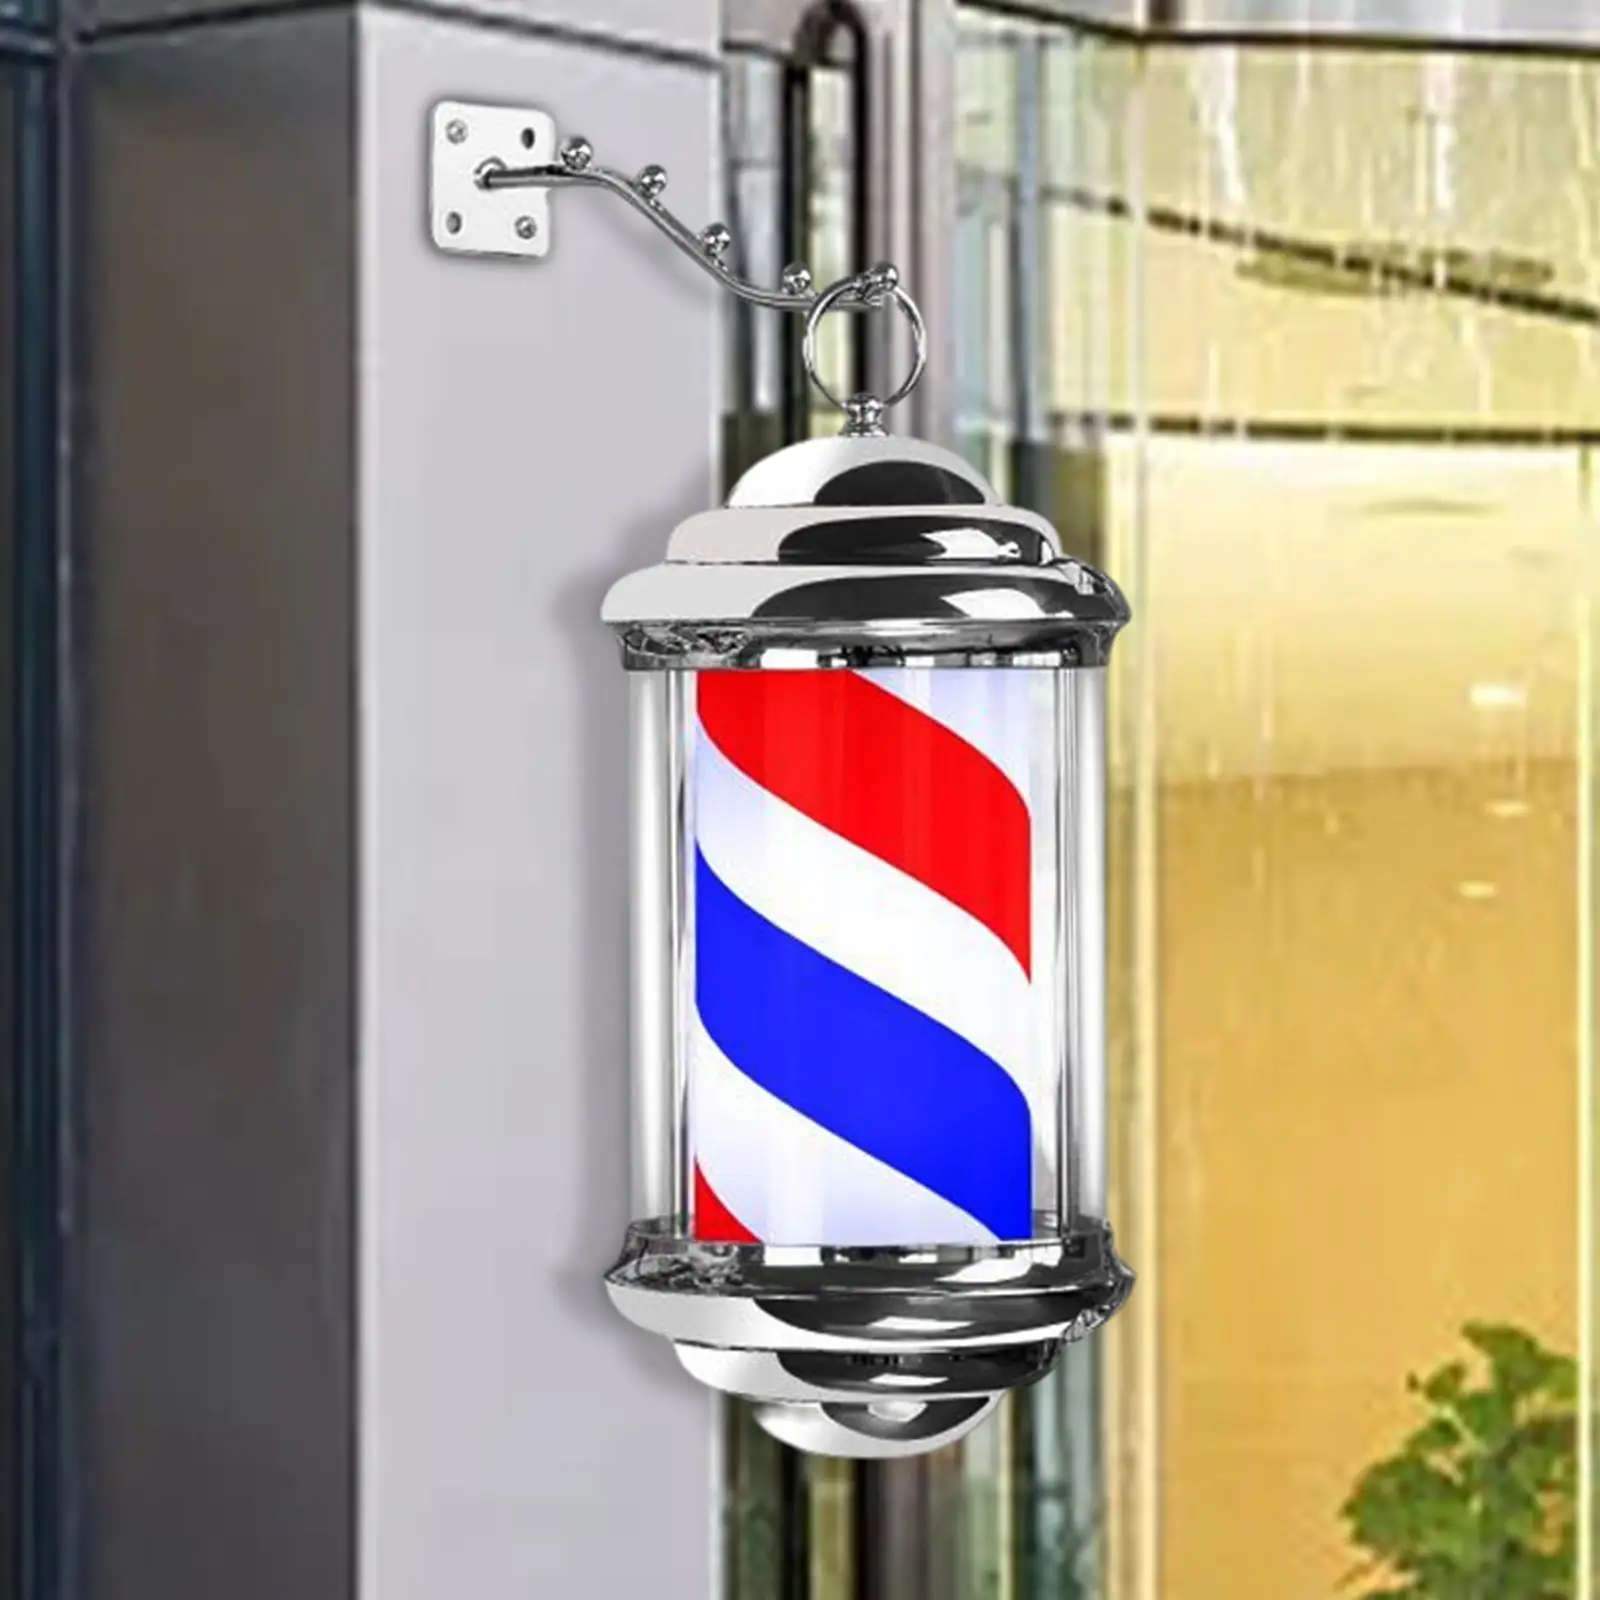 Barber Shop Pole Light Stripe Rotating Hair Salon Shop Open Signs Water Resistant Neon Signs Windproof LED Lamp for Party Indoor